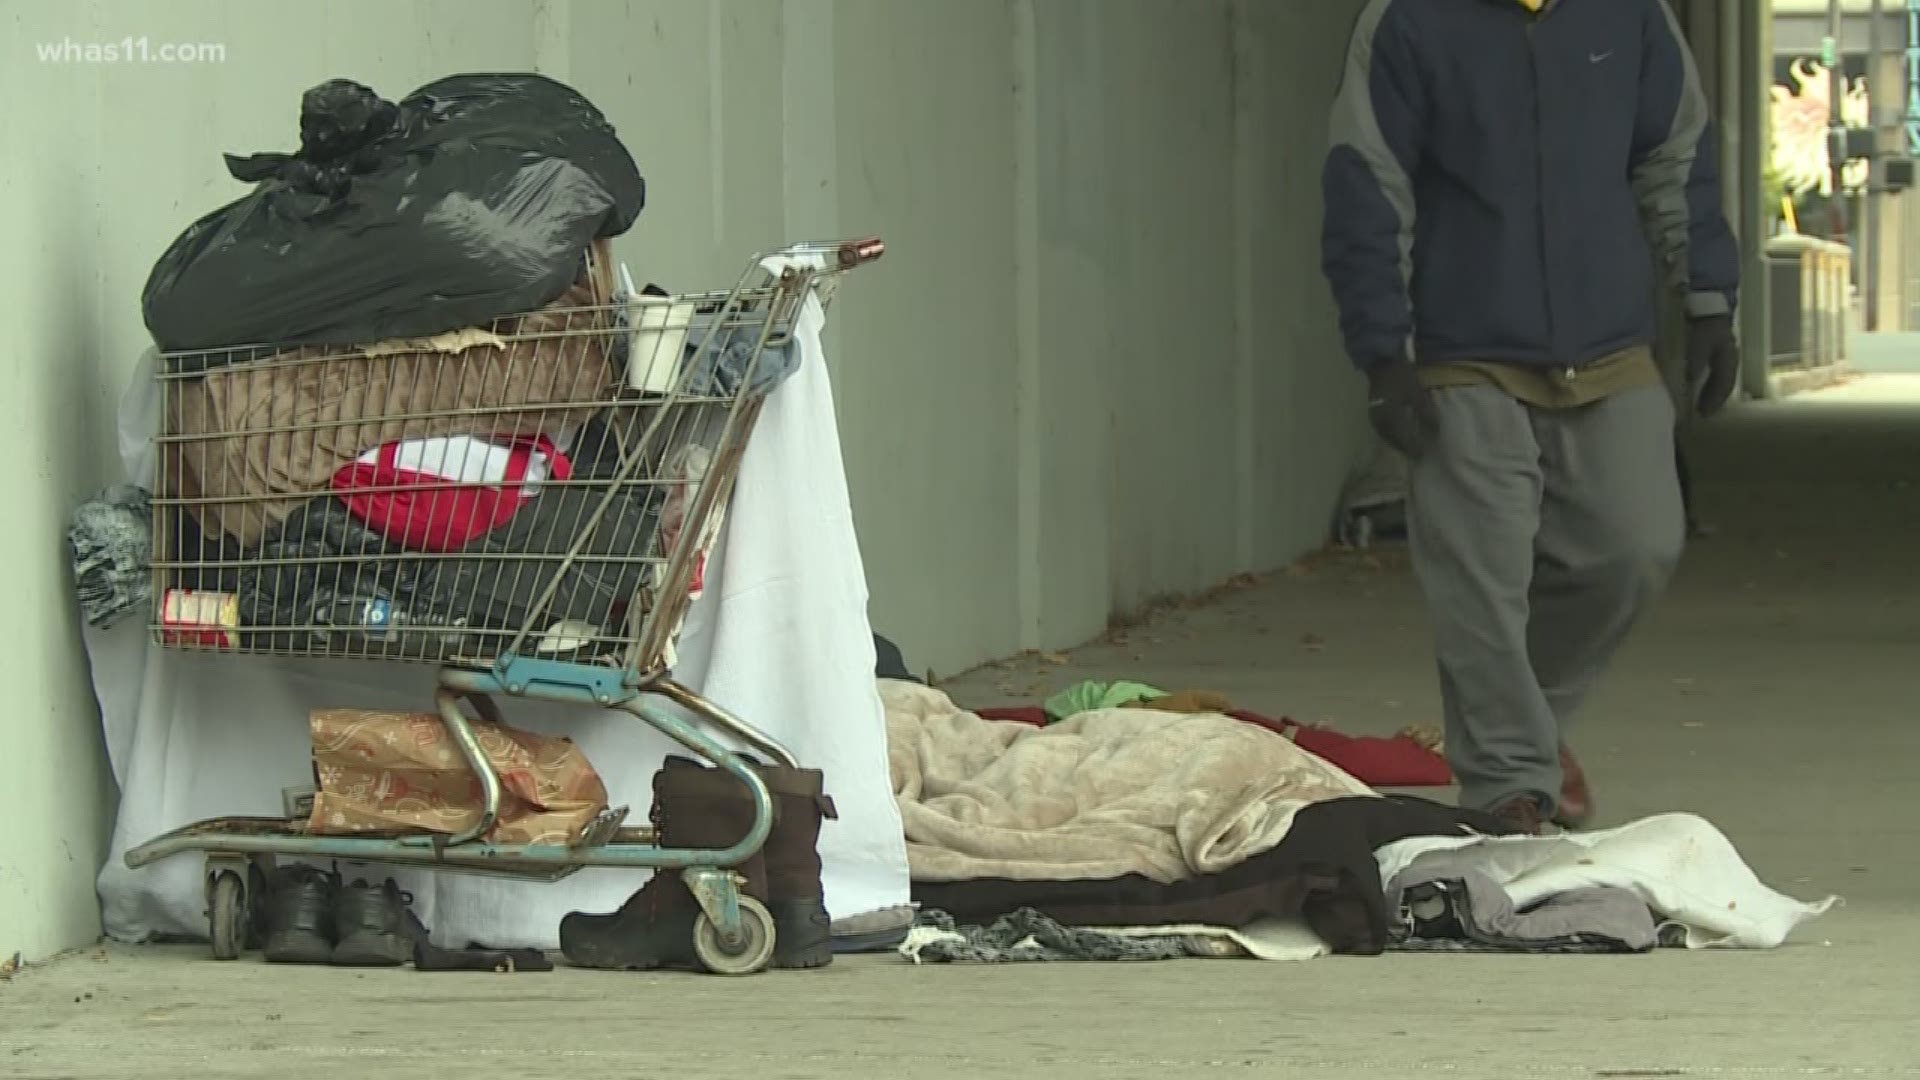 Metro Councilwoman Barbara Sexton Smith joined WHAS11 alongside Eric Friedlander of the mayor's homeless task force to discuss solutions to Louisville's growing homeless population.